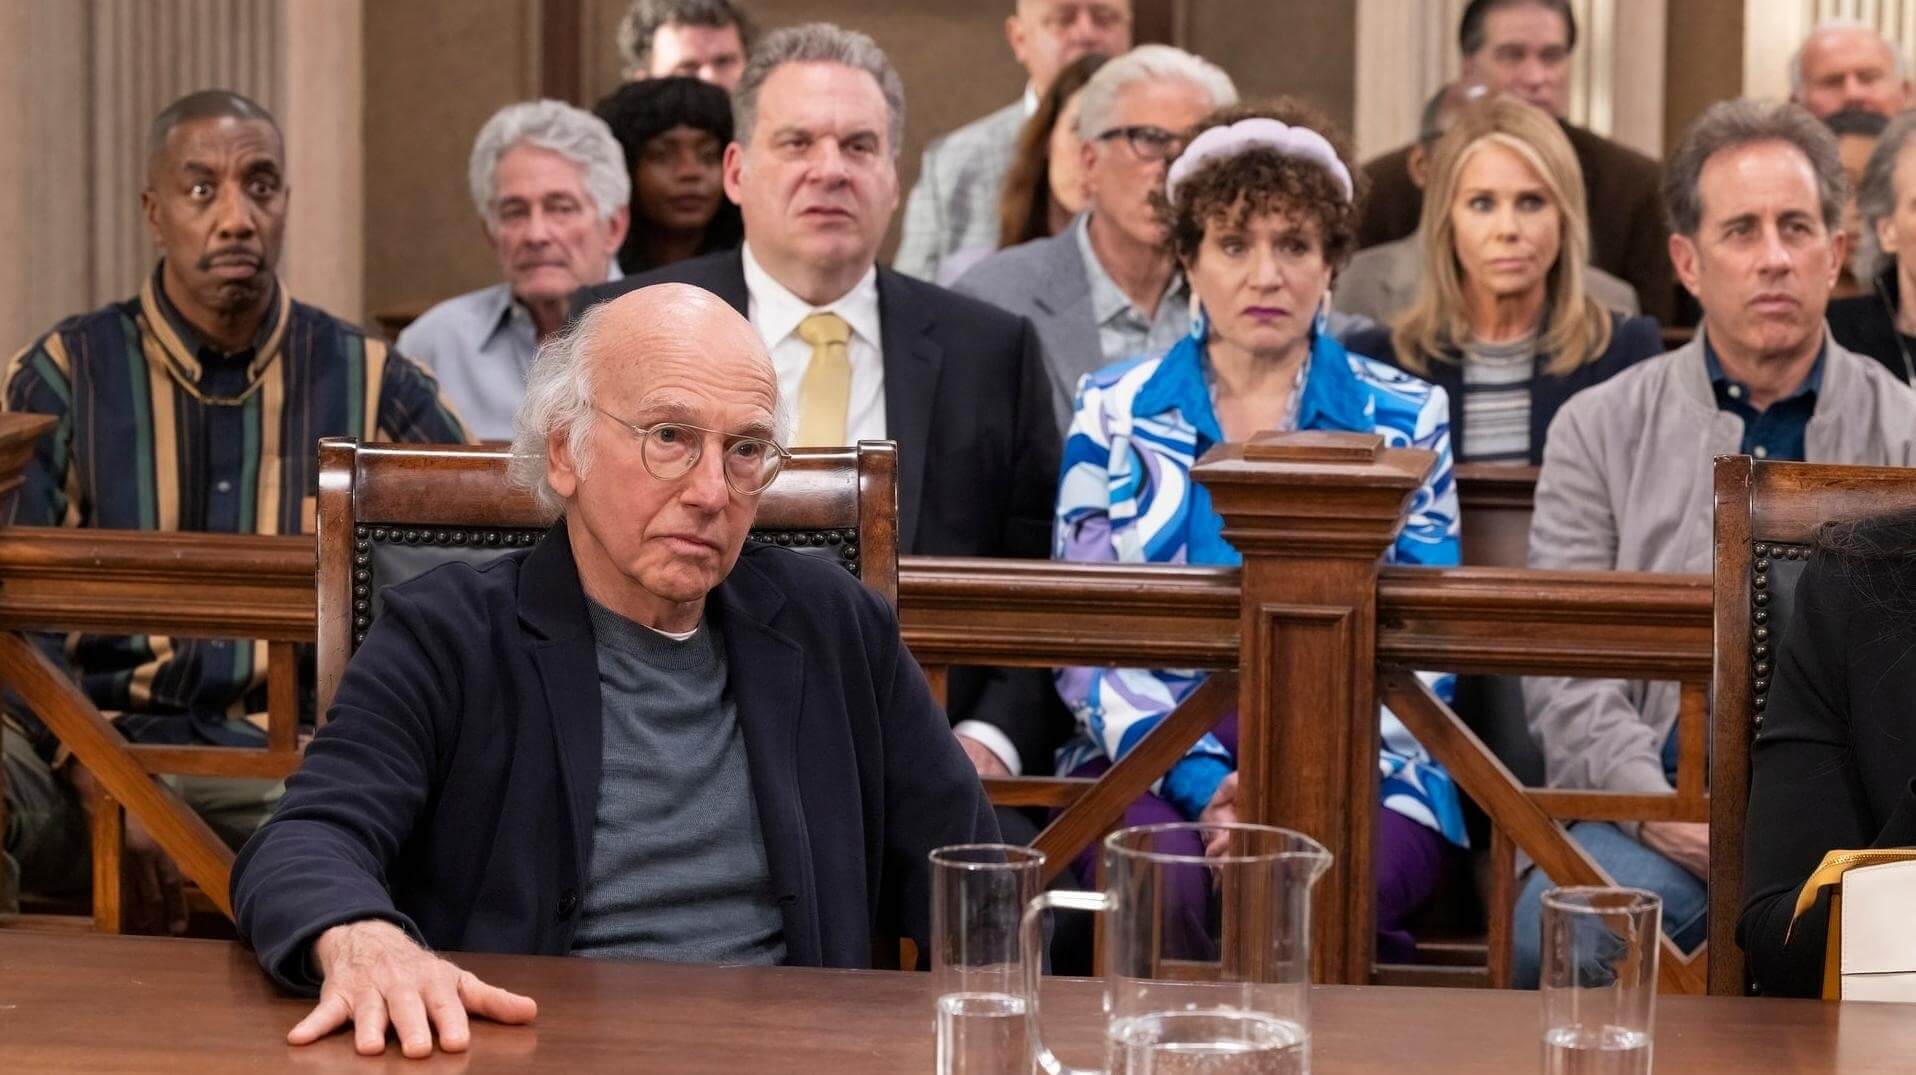 Curb Your Enthusiasm series finale: Oh baby, it’s Seinfeld time!